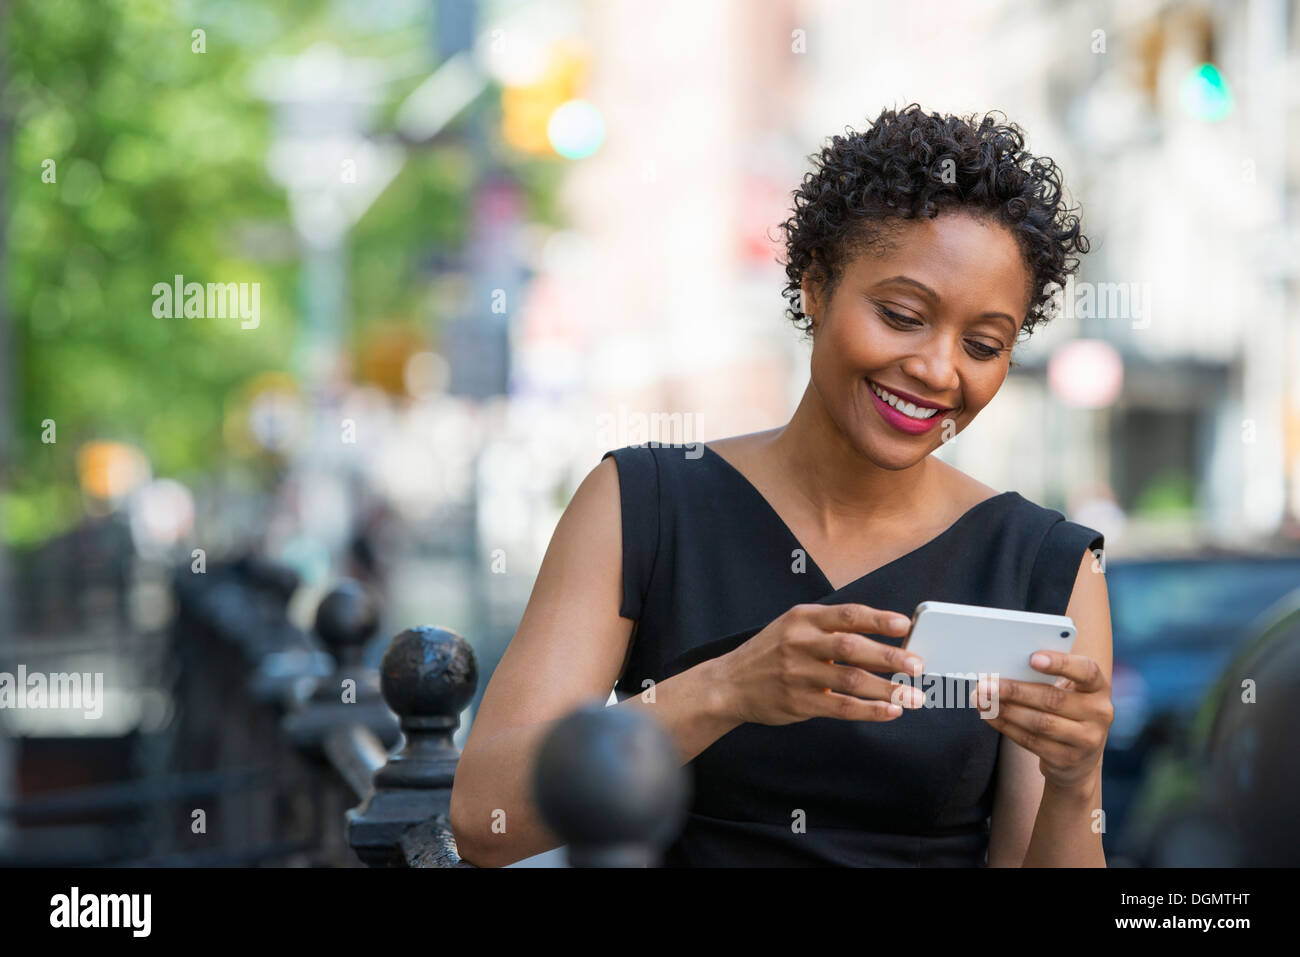 People on the move. A woman in a black dress on a city street, checking her phone. Stock Photo